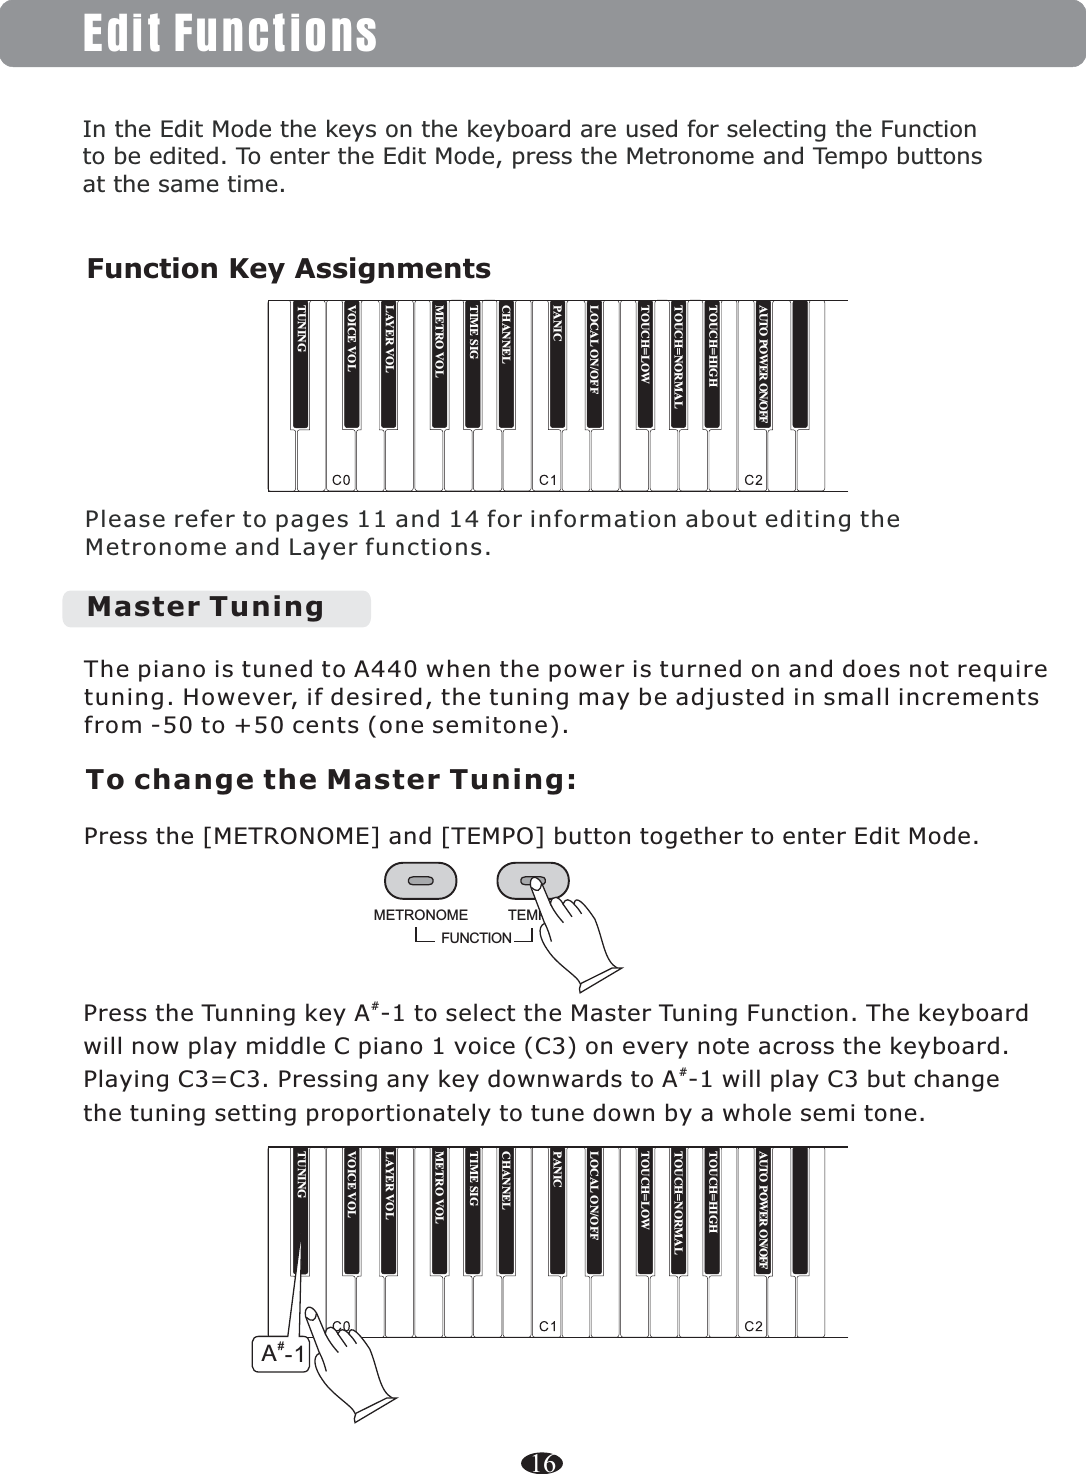 TUNINGTOUCH=HIGHTOUCH=NORMALTOUCH=LOWLOCAL ON/OFFPANICCHANNELTIME SIGMETRO VOLLAYER VOLVOICE VOLTUNINGTOUCH=HIGHTOUCH=NORMALTOUCH=LOWLOCAL ON/OFFPANICCHANNELTIME SIGMETRO VOLLAYER VOLVOICE VOLEdit FunctionsPlease refer to pages 11 and 14 for information about editing the Metronome and Layer functions.The piano is tuned to A440 when the power is turned on and does not require tuning. However, if desired, the tuning may be adjusted in small increments from -50 to +50 cents (one semitone).Master TuningFunction Key AssignmentsTo change the Master Tuning:Press the [METRONOME] and [TEMPO] button together to enter Edit Mode.In the Edit Mode the keys on the keyboard are used for selecting the Functionto be edited. To enter the Edit Mode, press the Metronome and Tempo buttons at the same time.16FUNCTIONTEMPOMETRONOME#Press the Tunning key A -1 to select the Master Tuning Function. The keyboard will now play middle C piano 1 voice (C3) on every note across the keyboard. #Playing C3=C3. Pressing any key downwards to A -1 will play C3 but change the tuning setting proportionately to tune down by a whole semi tone. #-1AAUTO POWER  ON/OFF AUTO POWER  ON/OFF